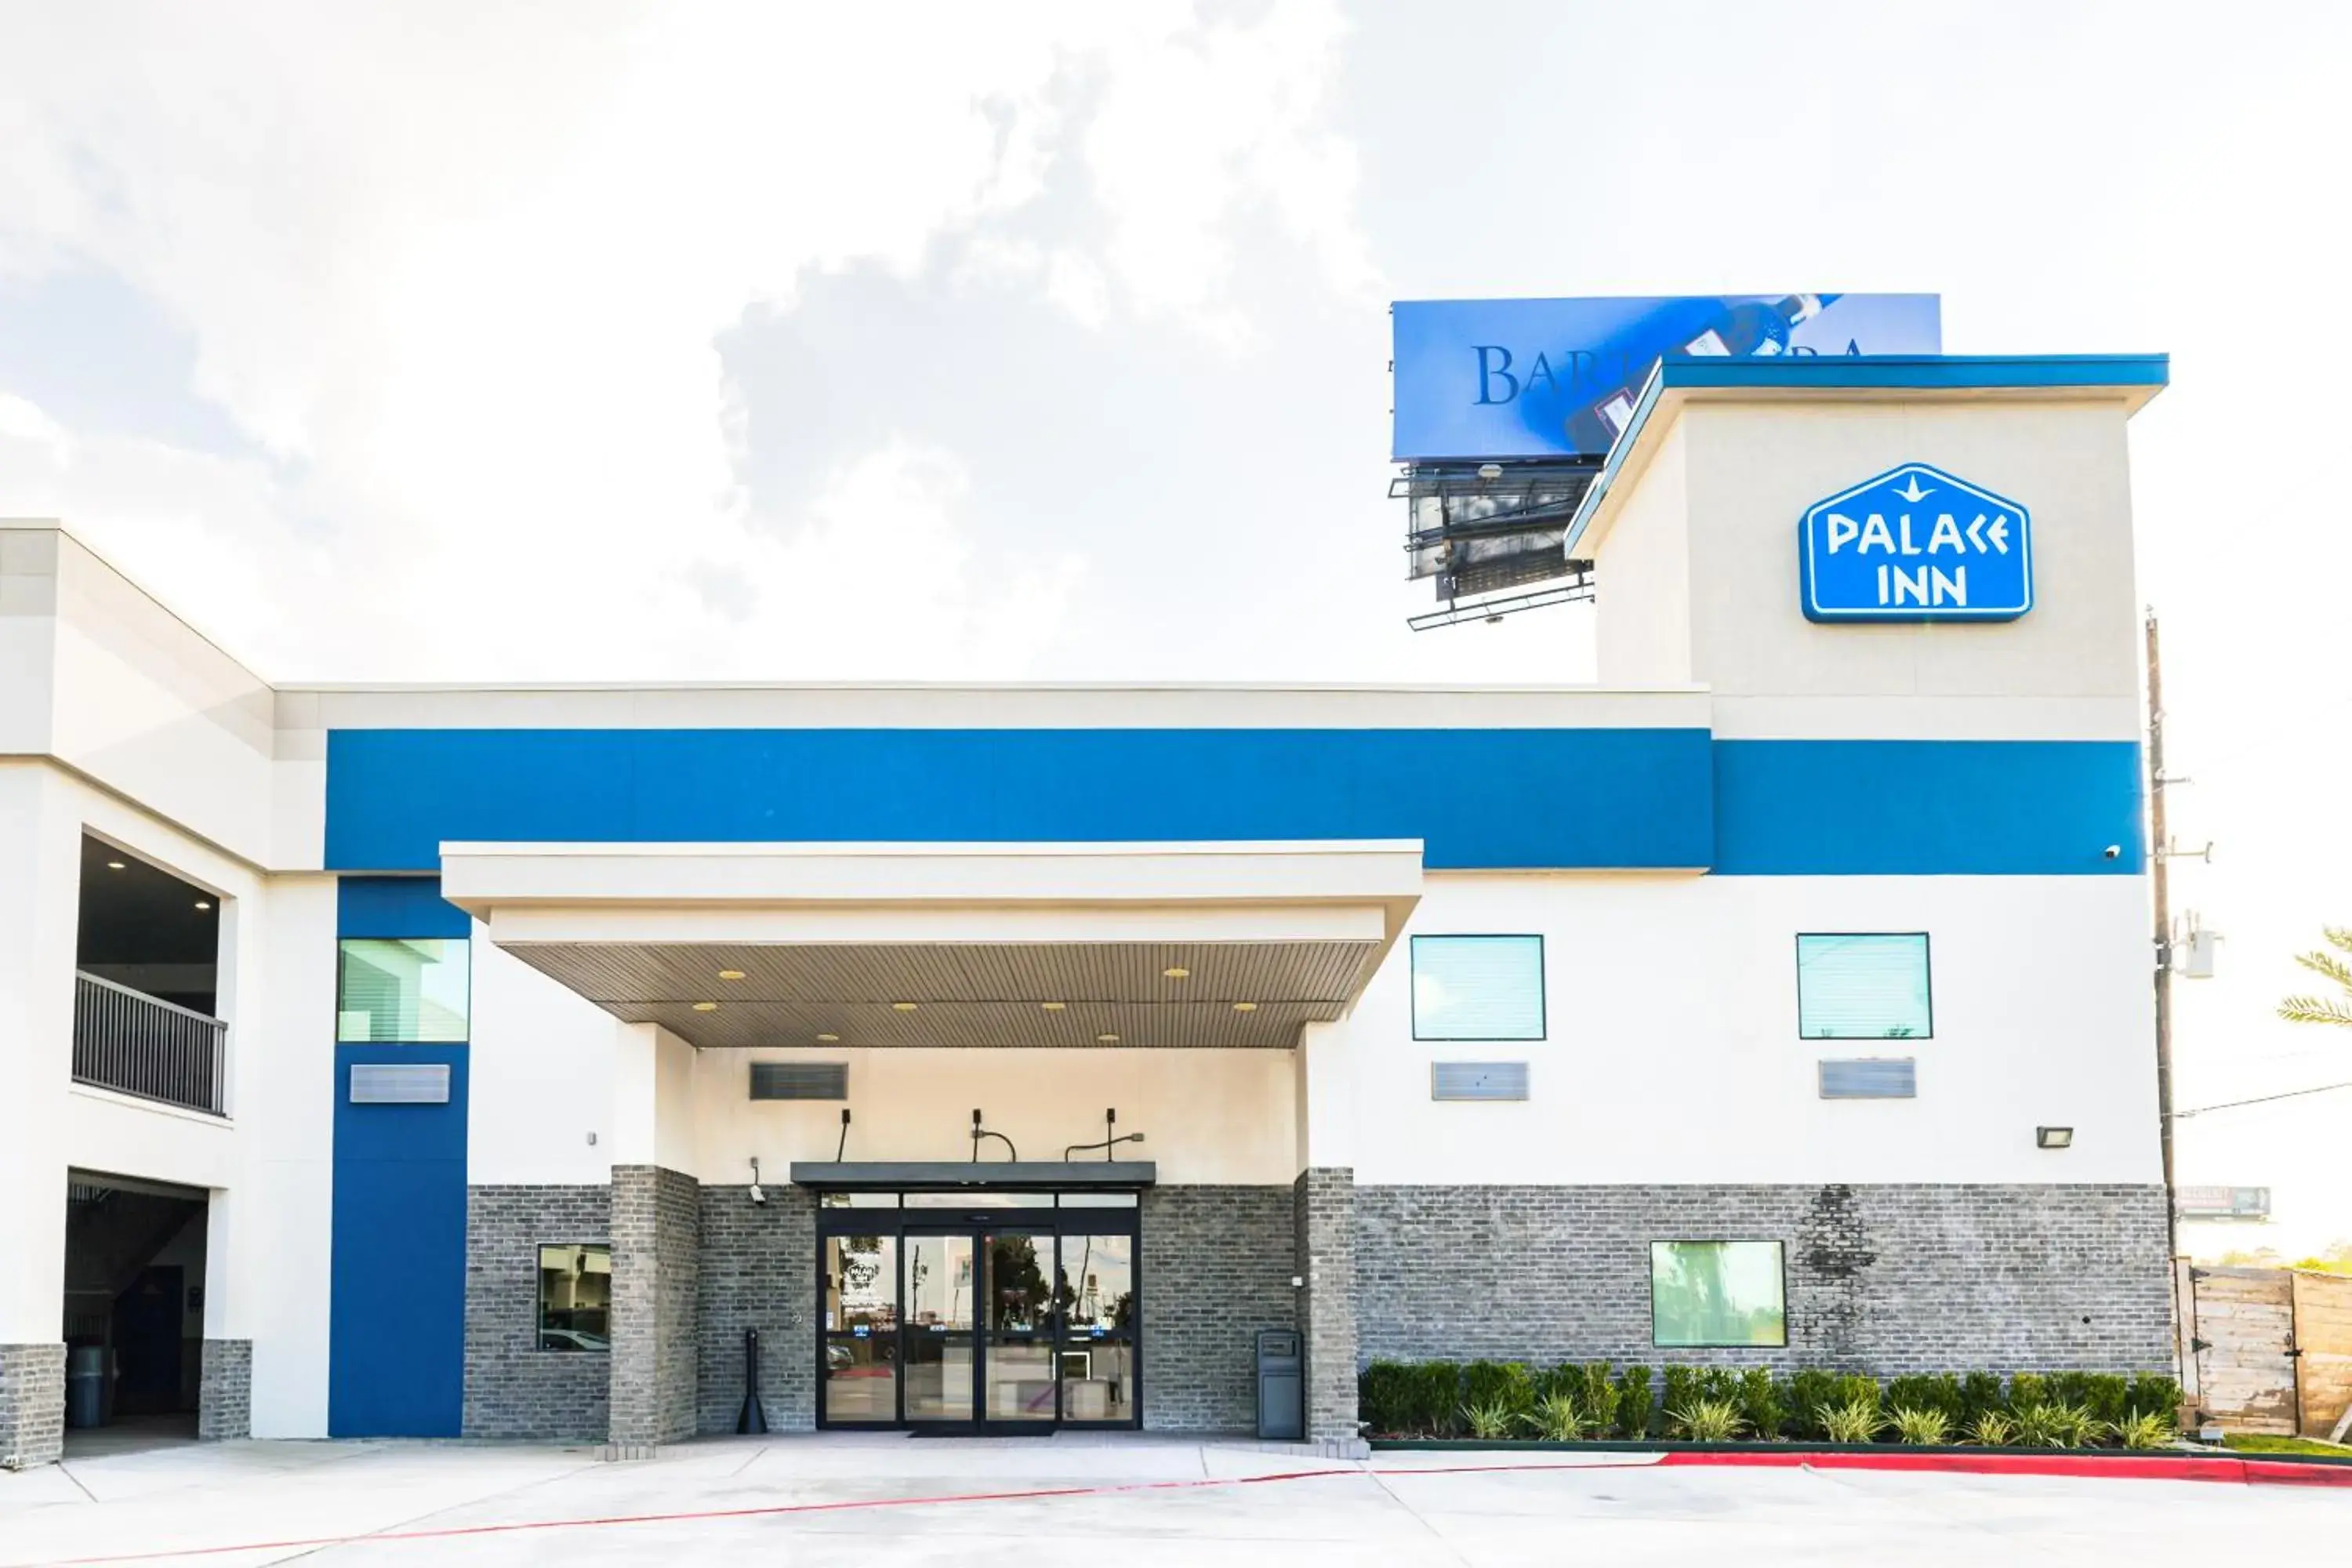 Property Building in Palace inn Blue IAH